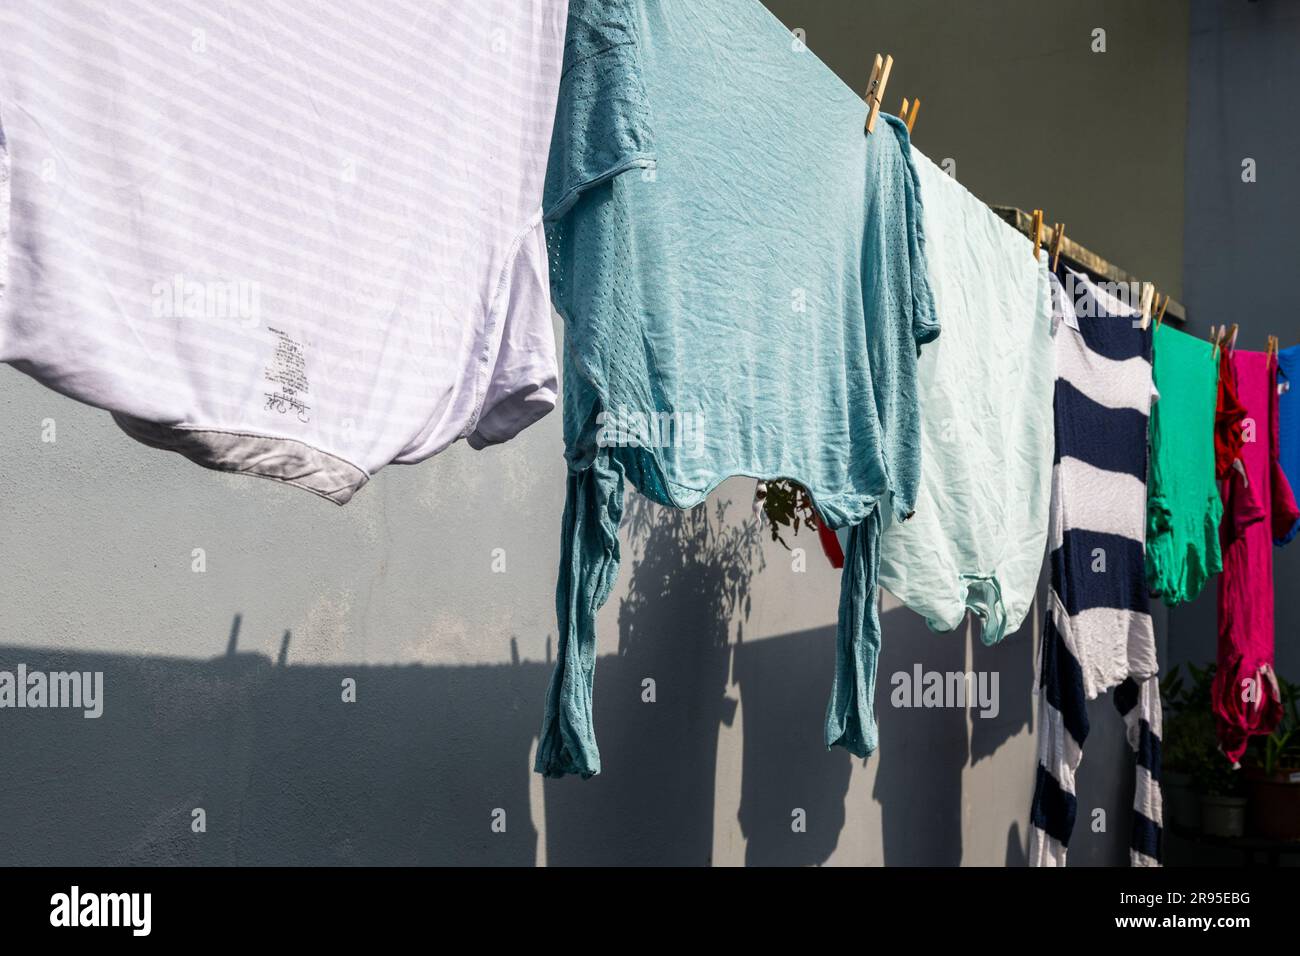 Clothes drying on a washing line in the sun. Stock Photo